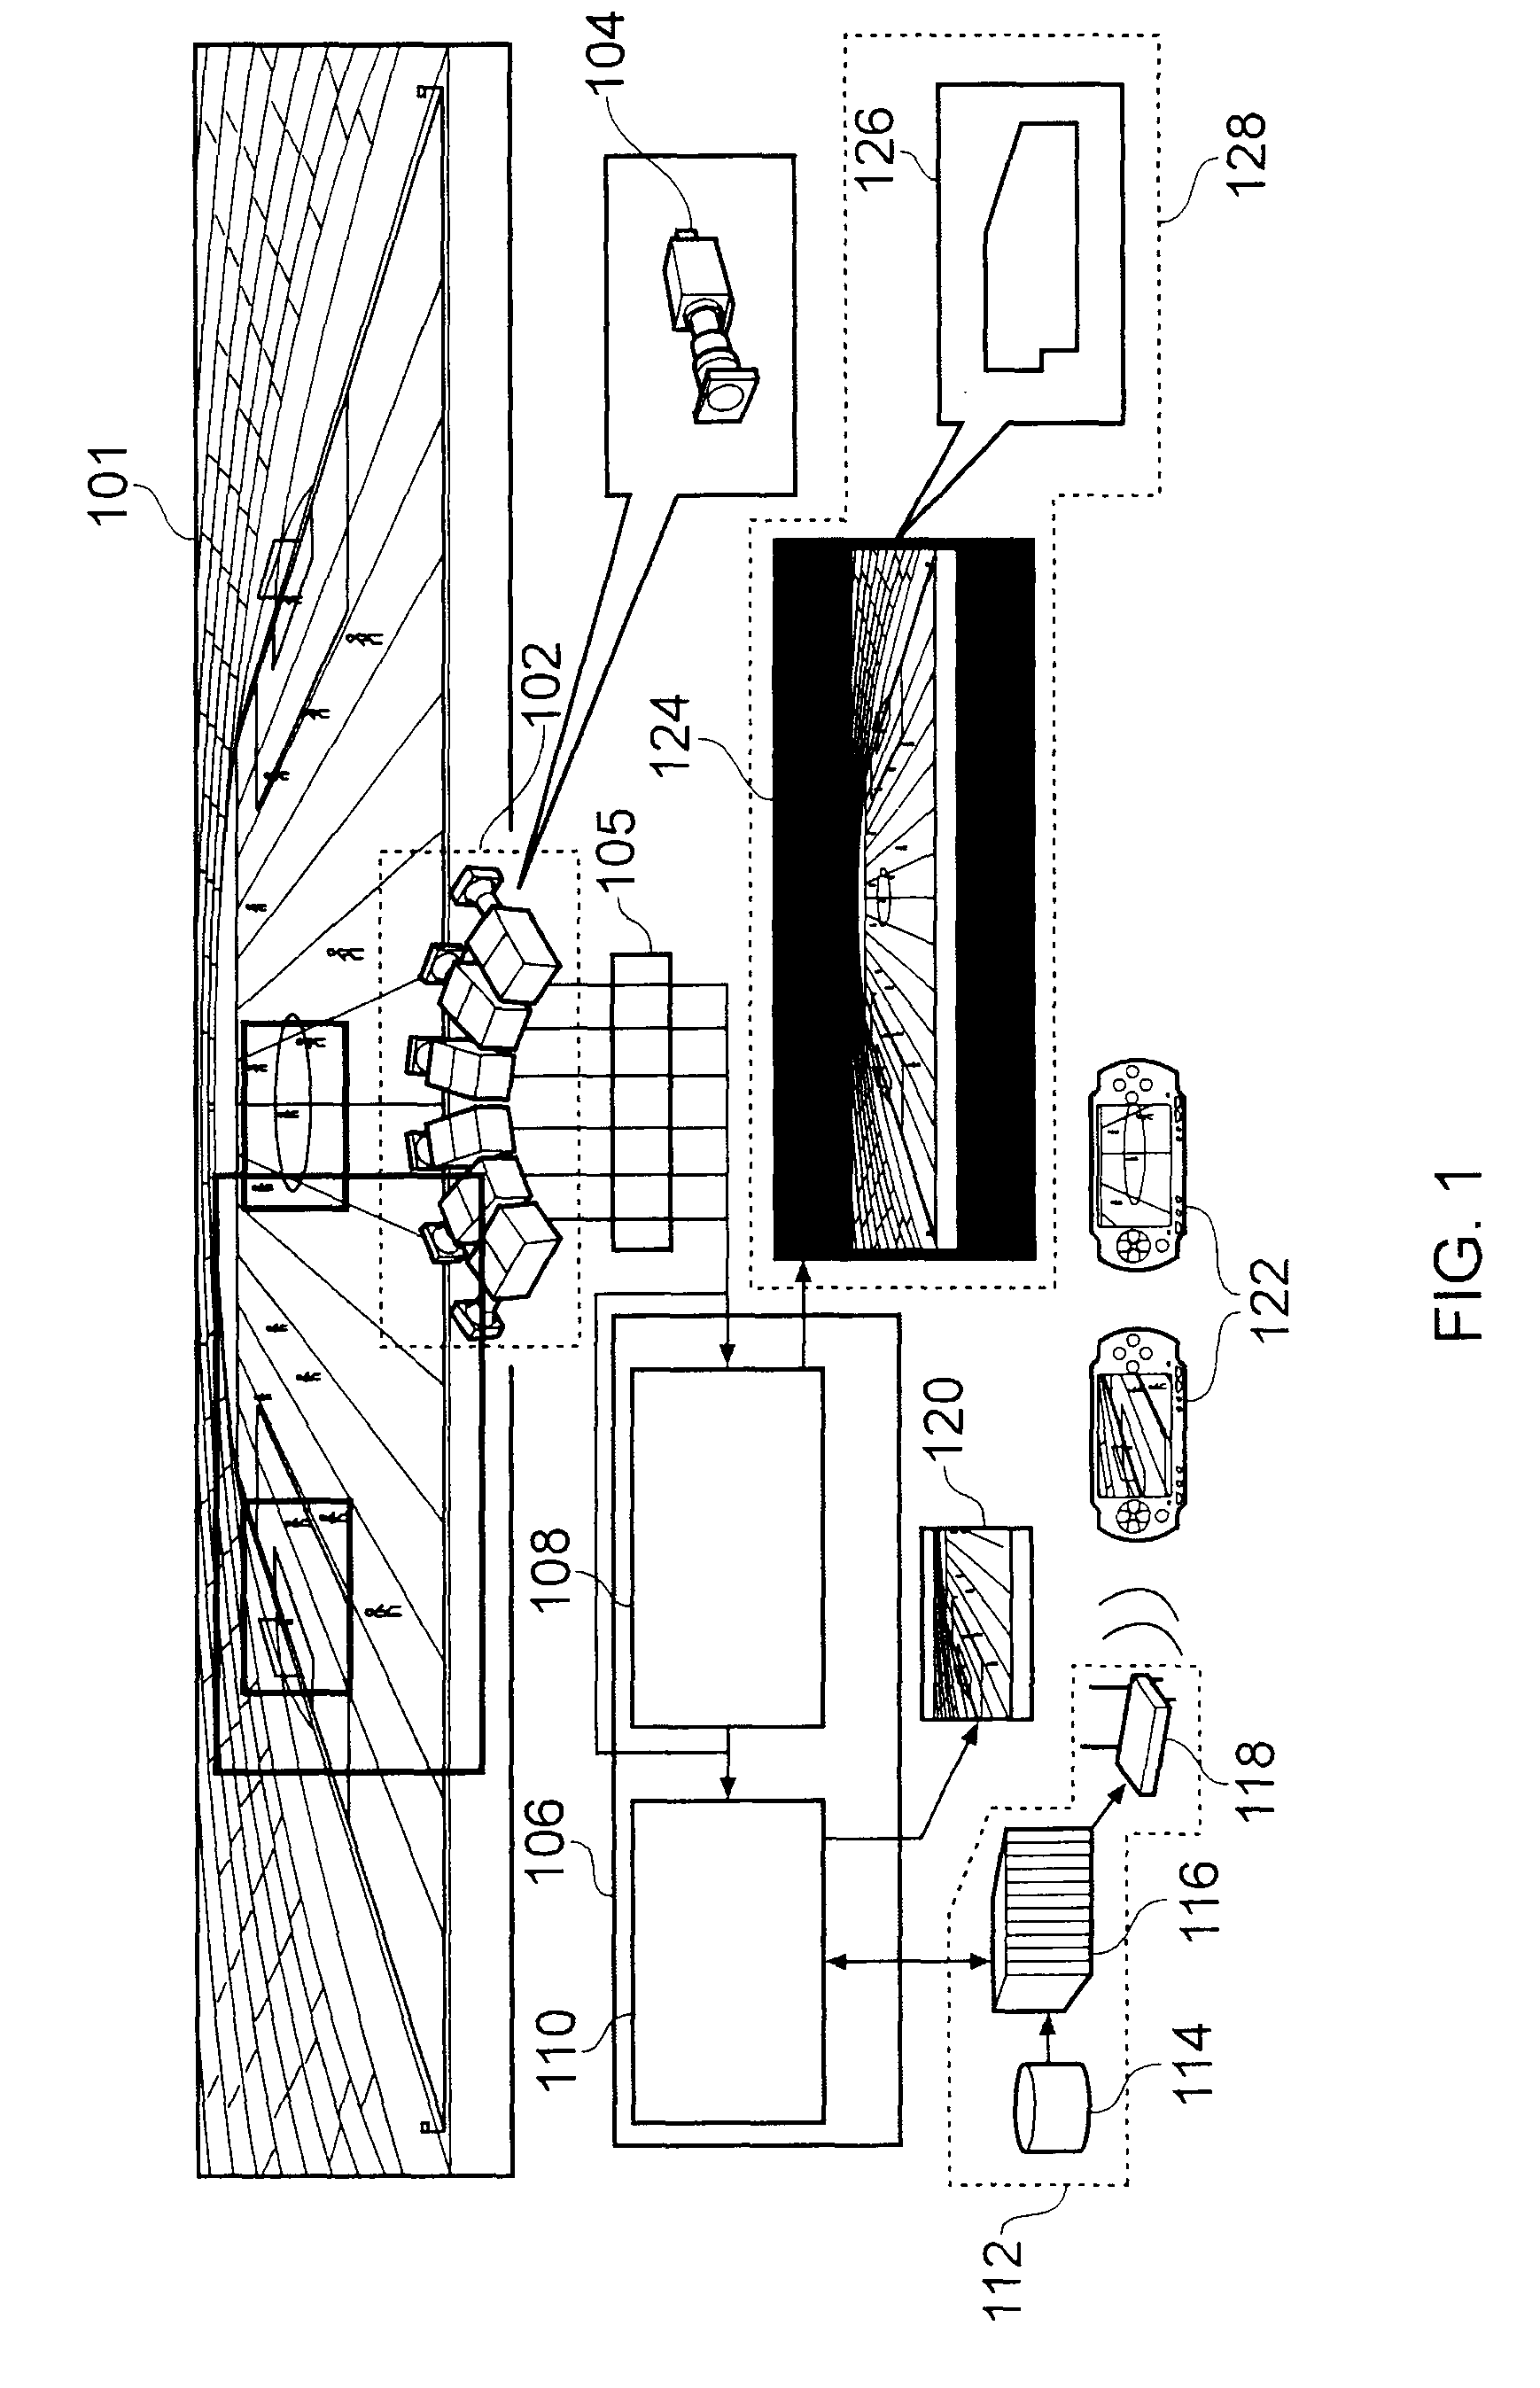 Method and apparatus for forming a composite image